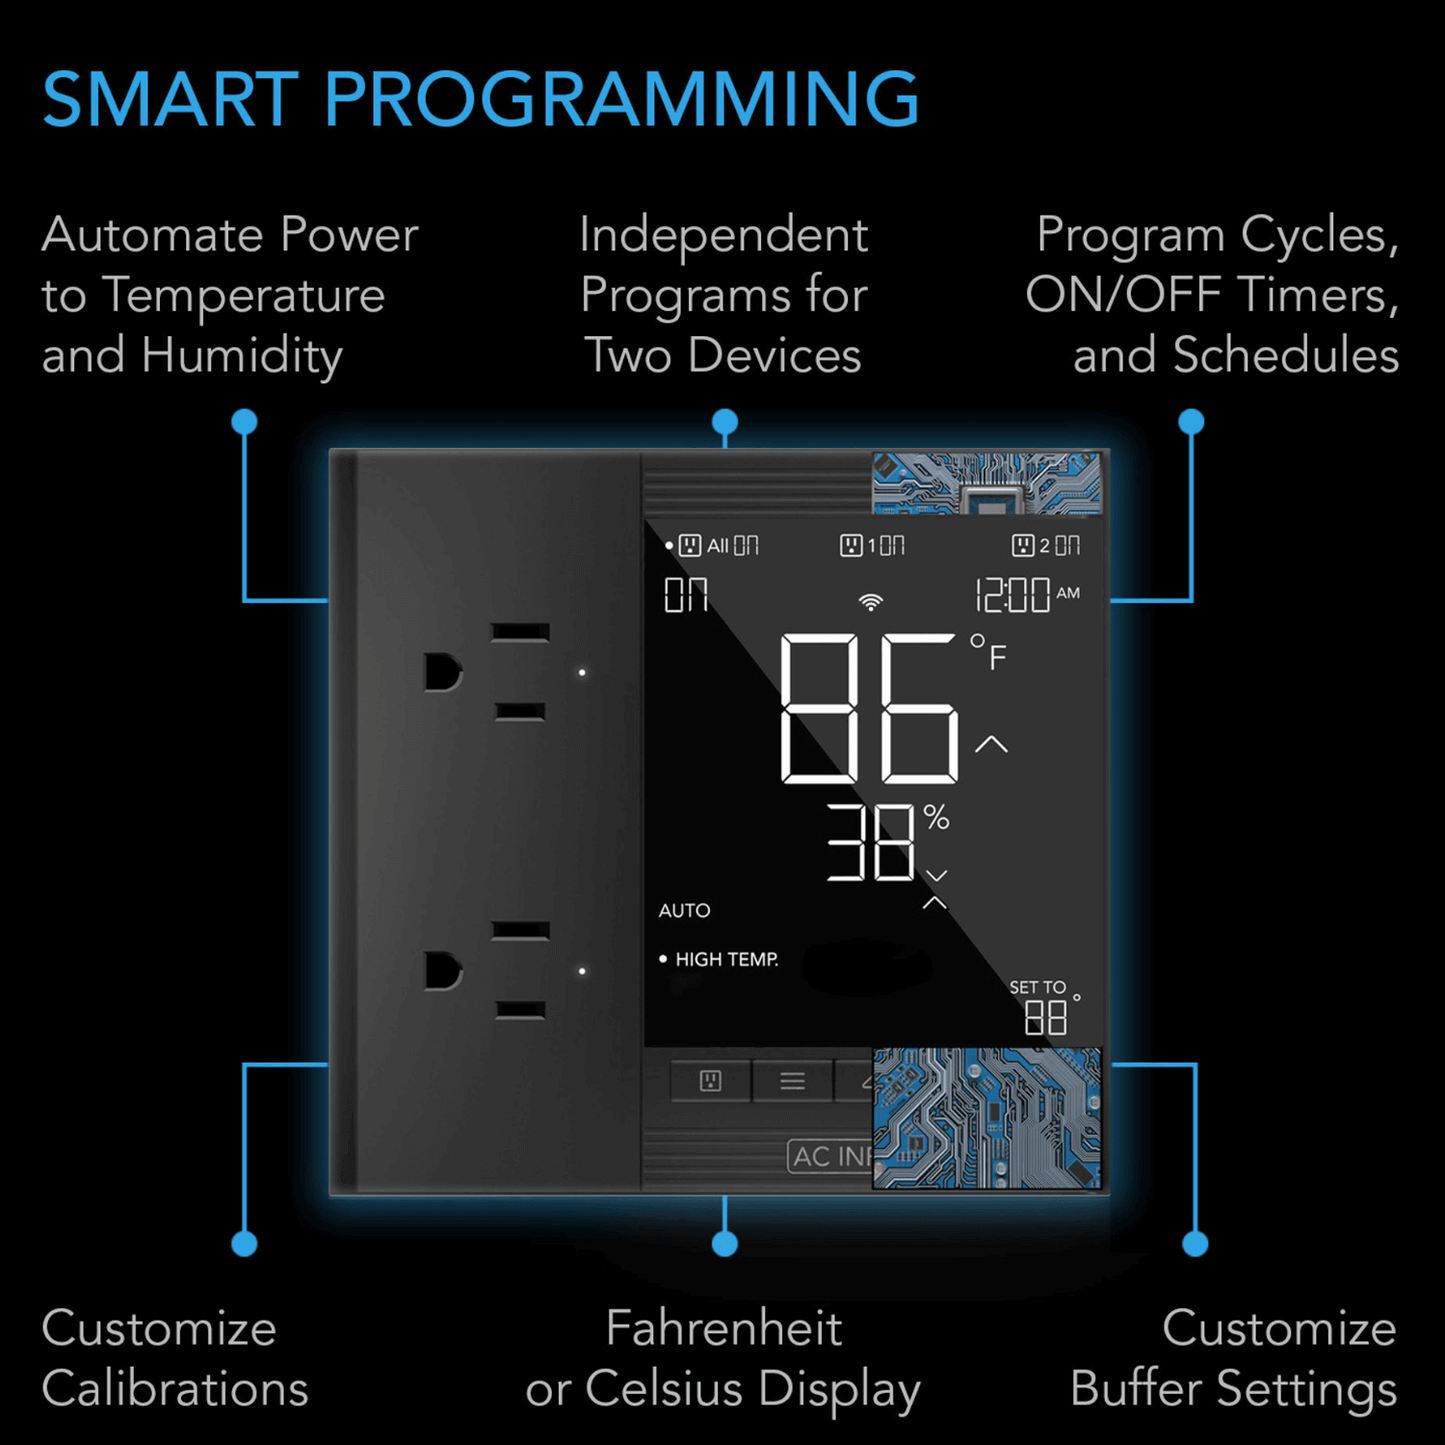 AC Infinity CONTROLLER 75, Smart Outlet Controller, Temperature, Humidity, Schedule Programs for Two Devices, Data App, Bluetooth CTR75A Climate Control